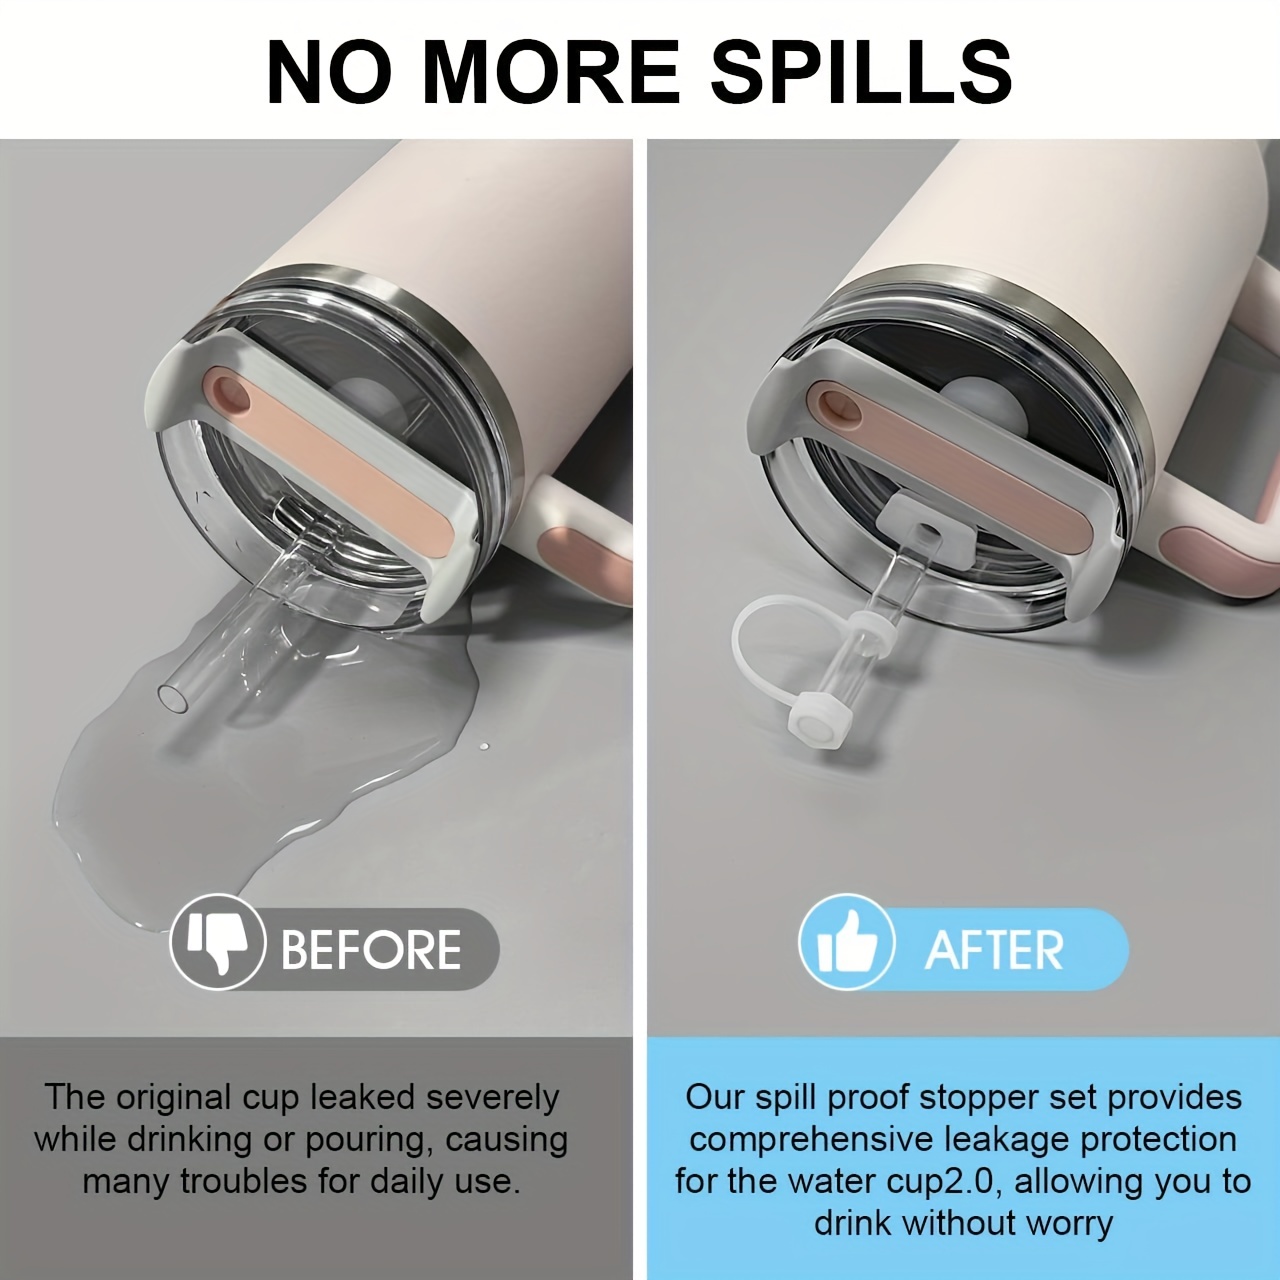 Silicone Spill Proof Stopper Set: Keep Your Drinks Secure With